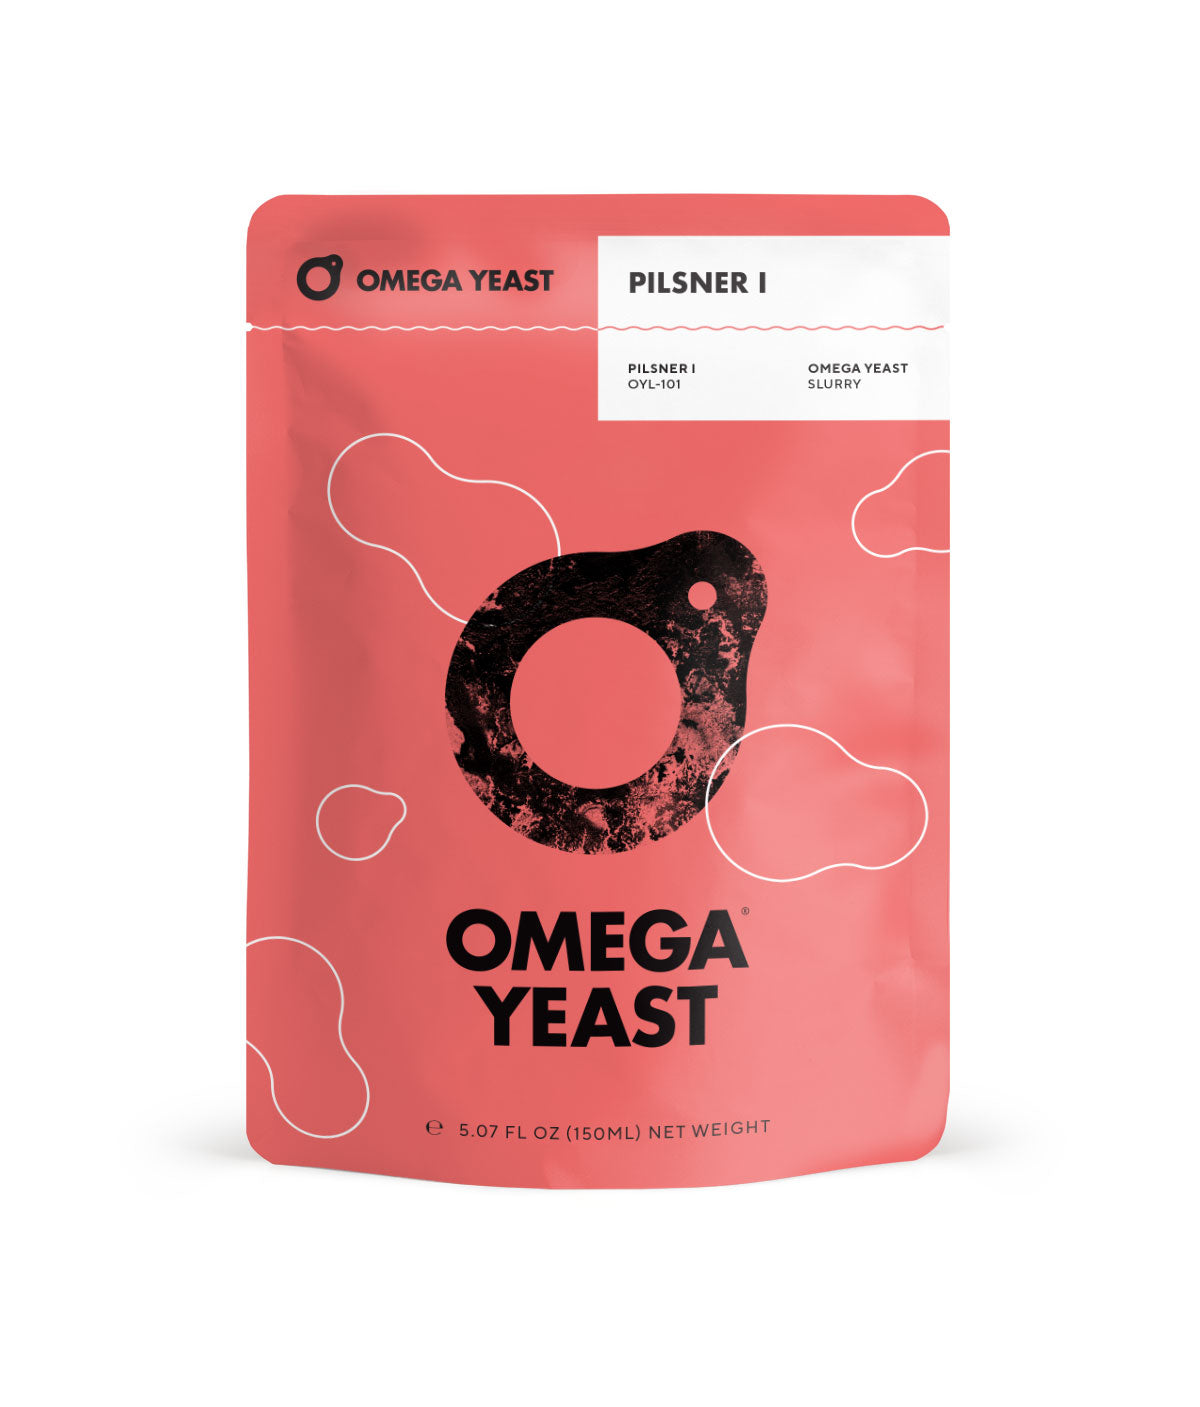 Pilsner I Yeast by Omega Yeast